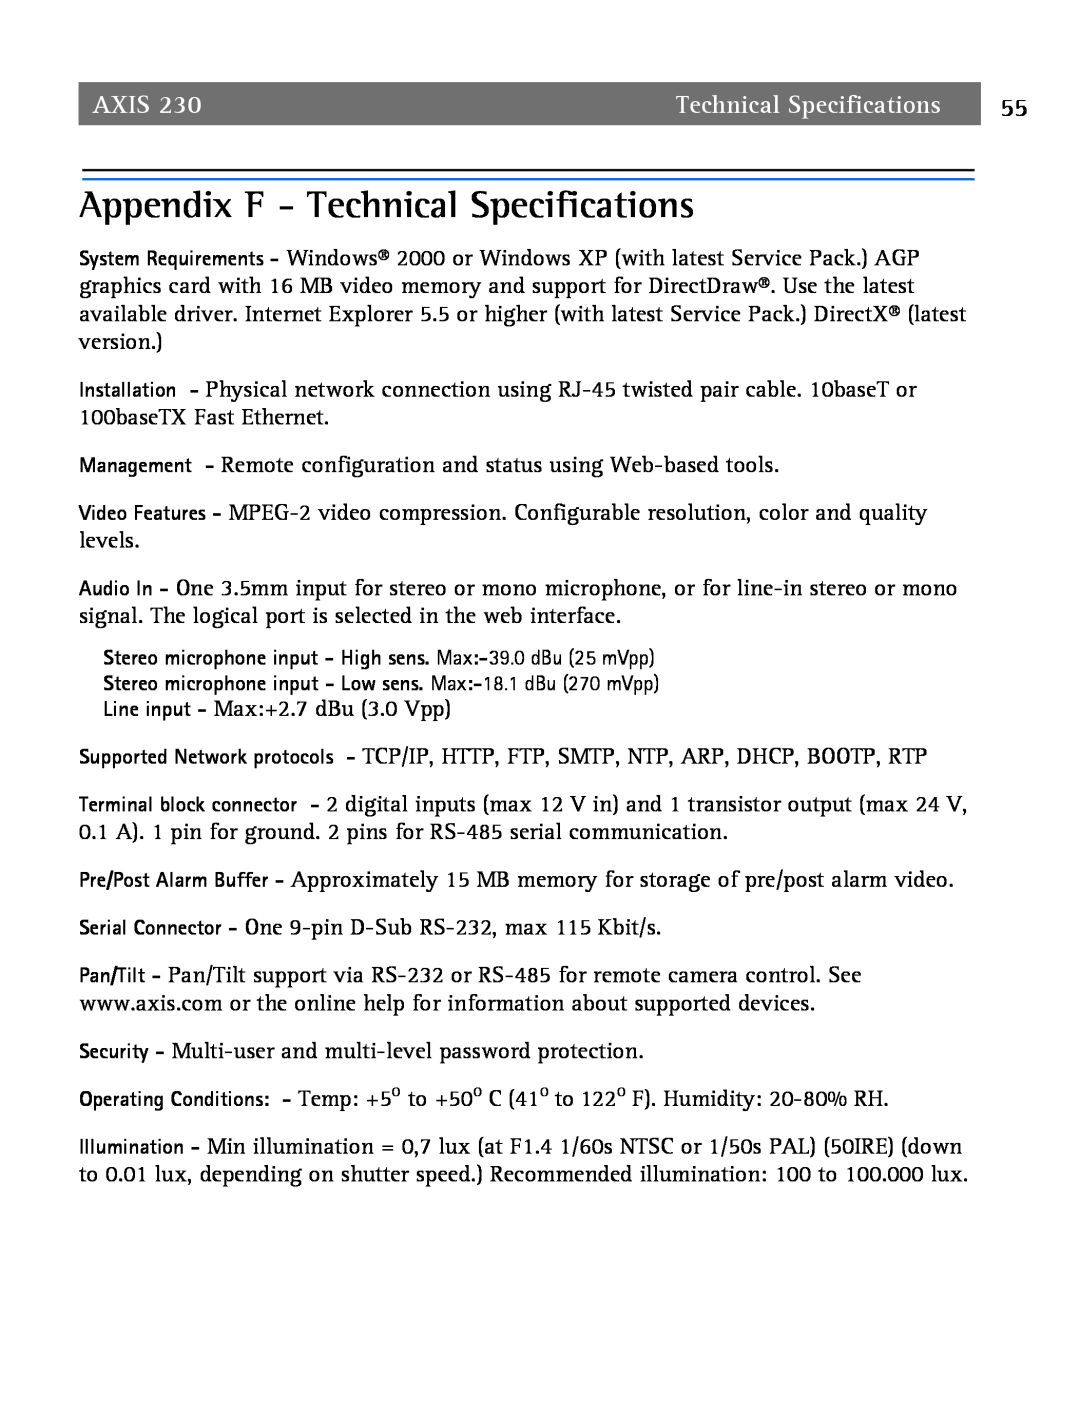 Axis Communications 2 user manual Appendix F - Technical Specifications, Axis 